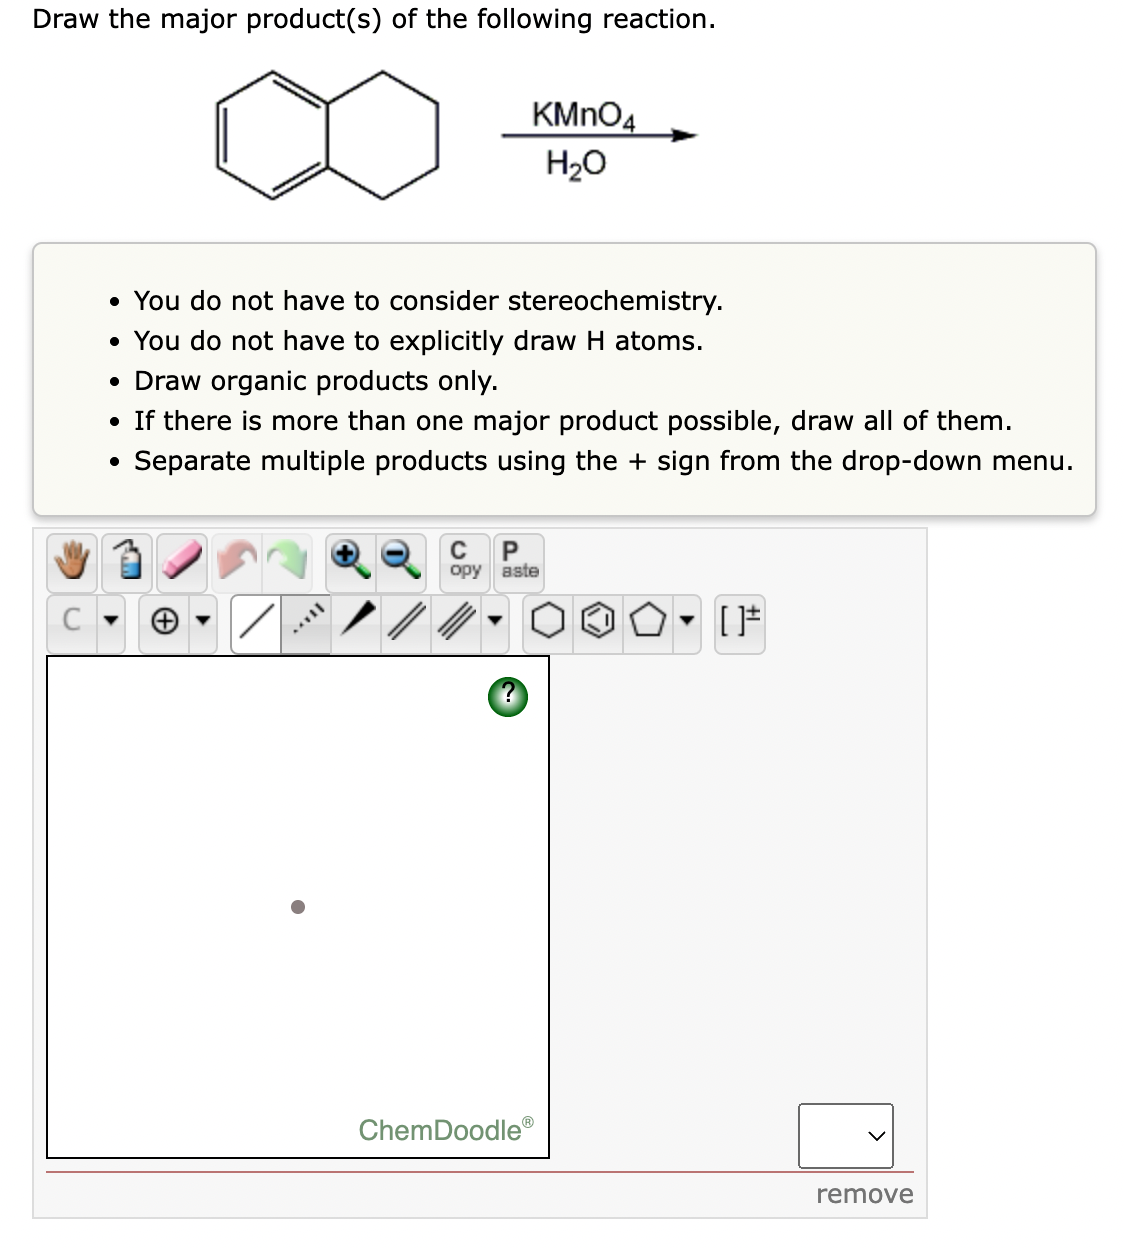 Draw the major product(s) of the following reaction.
KMNO4
H20
• You do not have to consider stereochemistry.
• You do not have to explicitly draw H atoms.
• Draw organic products only.
• If there is more than one major product possible, draw all of them.
Separate multiple products using the + sign from the dro
own menu.
C
P
opy aste
ChemDoodle
remove
